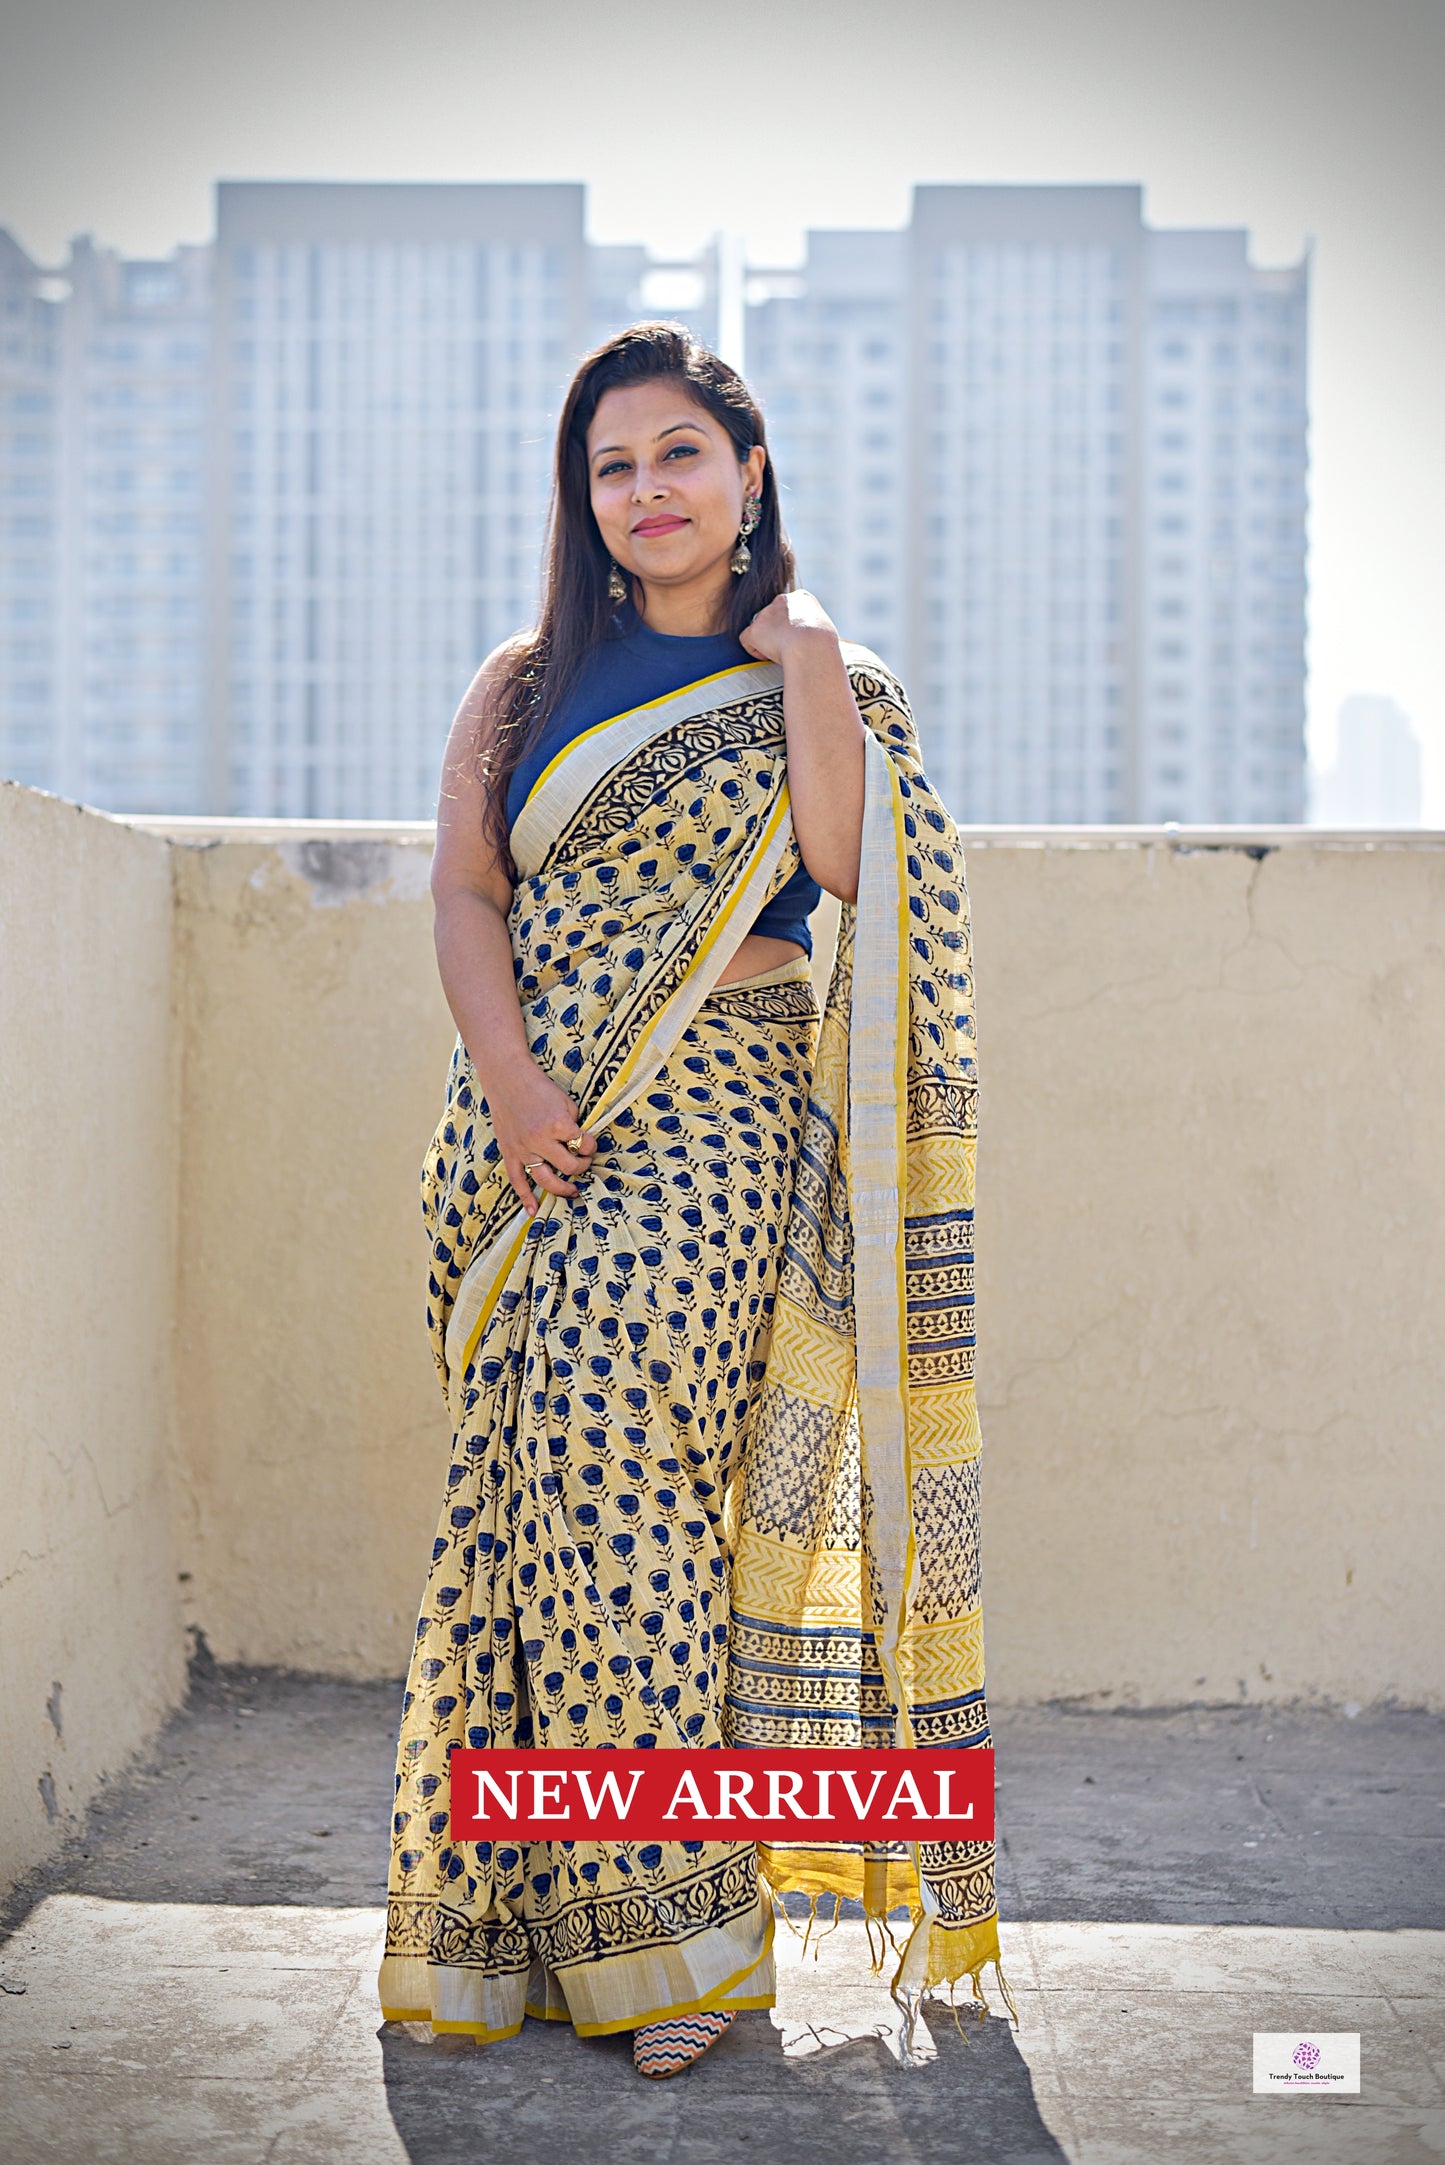 best summer handwoven handloom fabric handblock print organic slub linen saree yellow blue color at best price online with blouse piece for office wear or everyday styling!